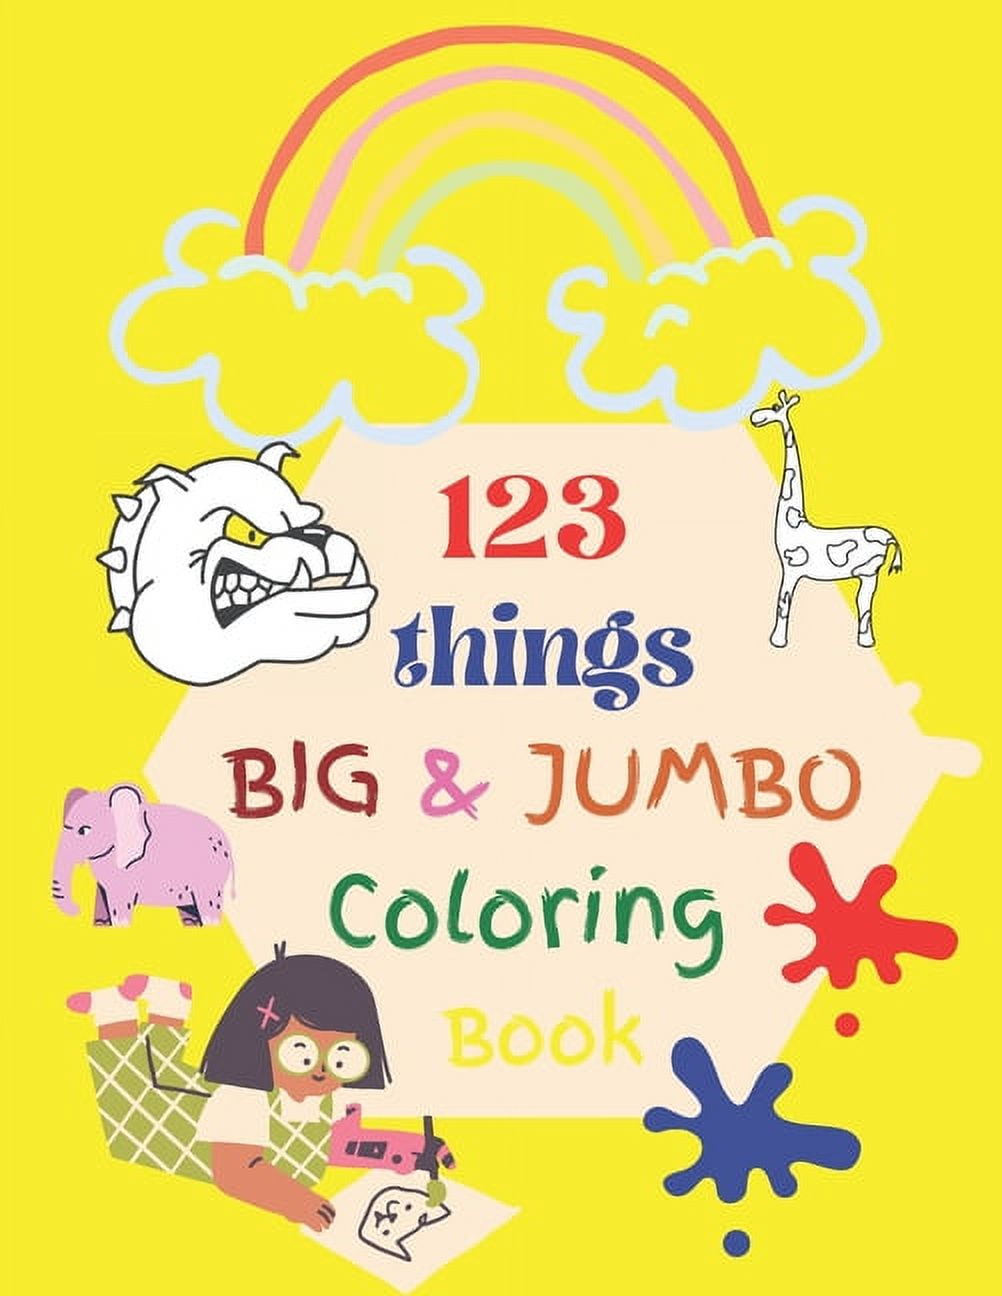 123 things BIG & JUMBO Coloring Book: 123 Coloring Pages!!, Easy, LARGE,  GIANT Simple Picture Coloring Books for Toddlers, Kids Ages 2-4, Early